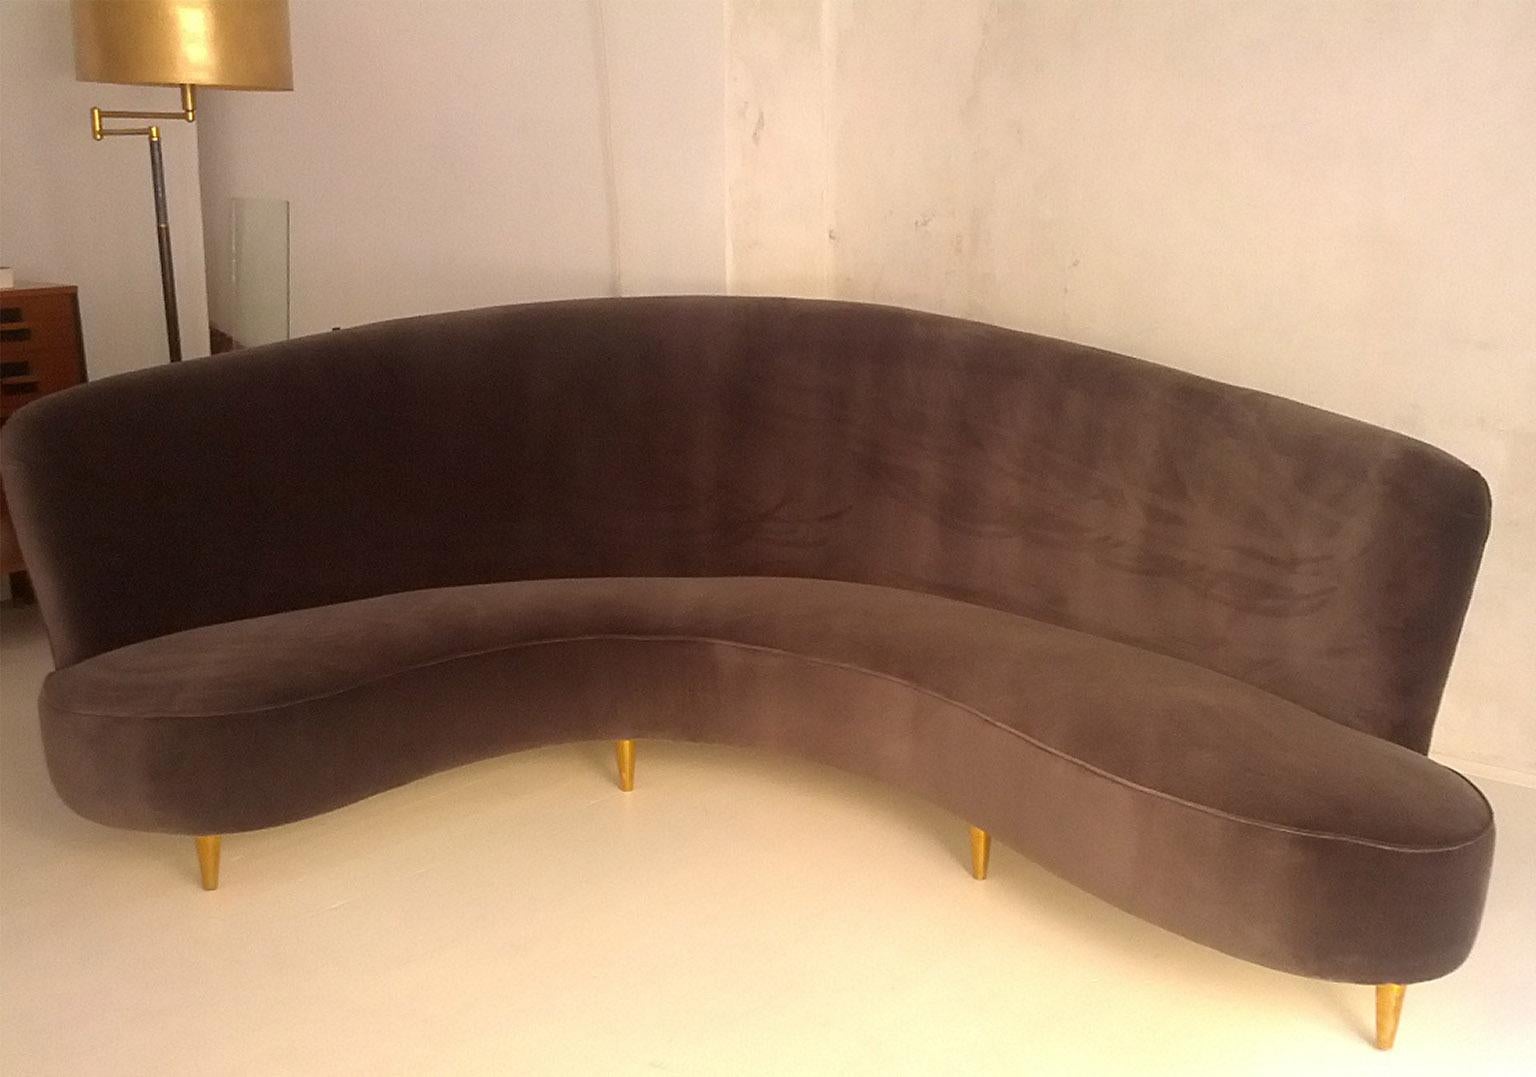 Fine large curved sofa upolstered with dark grey cotton velvet.
The elegant shape is enriched by brass feet.
Attributed to Federico Munari.